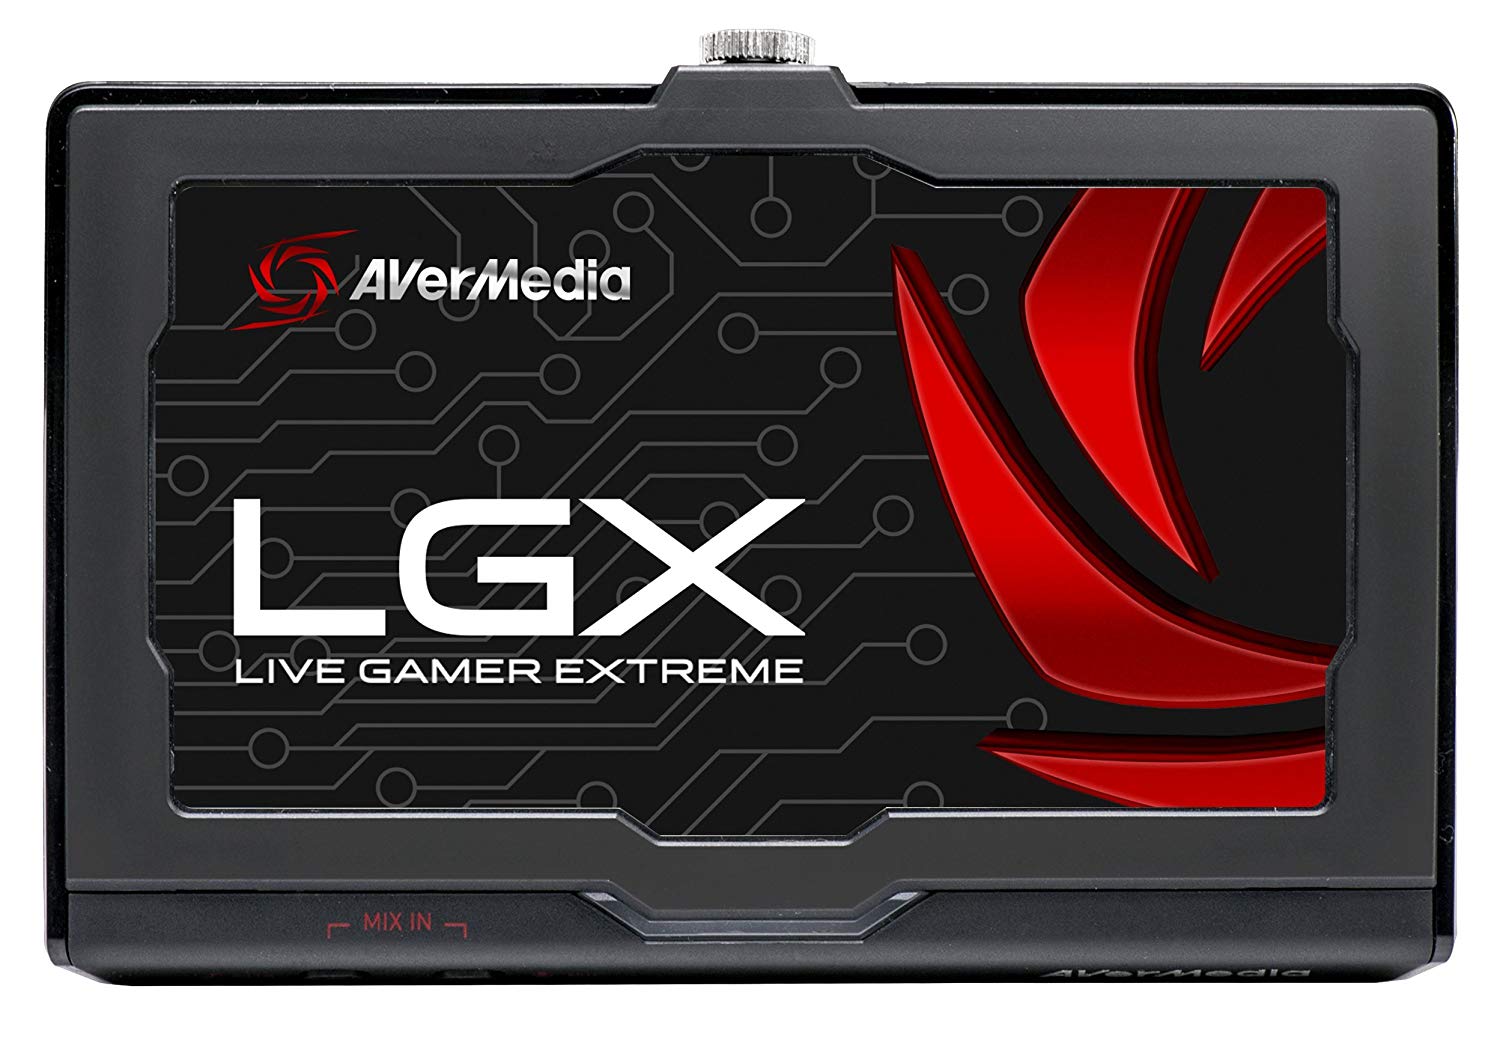 Avermedia Gc550 Live Gamer Extreme Usb3 0 Game Streaming And Video Capture Full Hd 1080p 60fps Ultra Low Latency Audio Mixer Support Game Recorder Fme